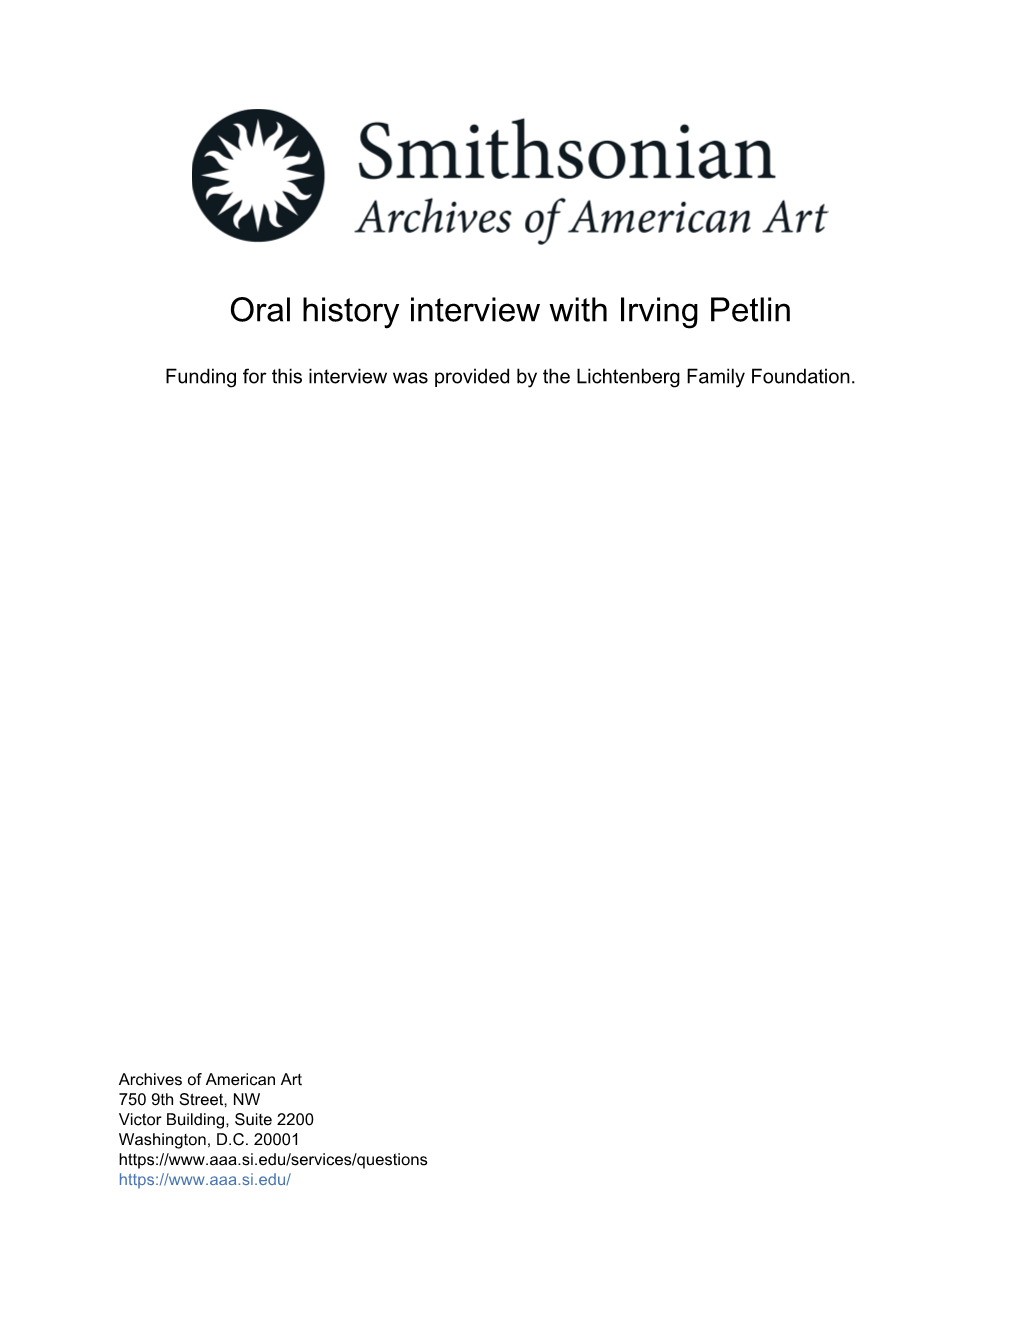 Oral History Interview with Irving Petlin